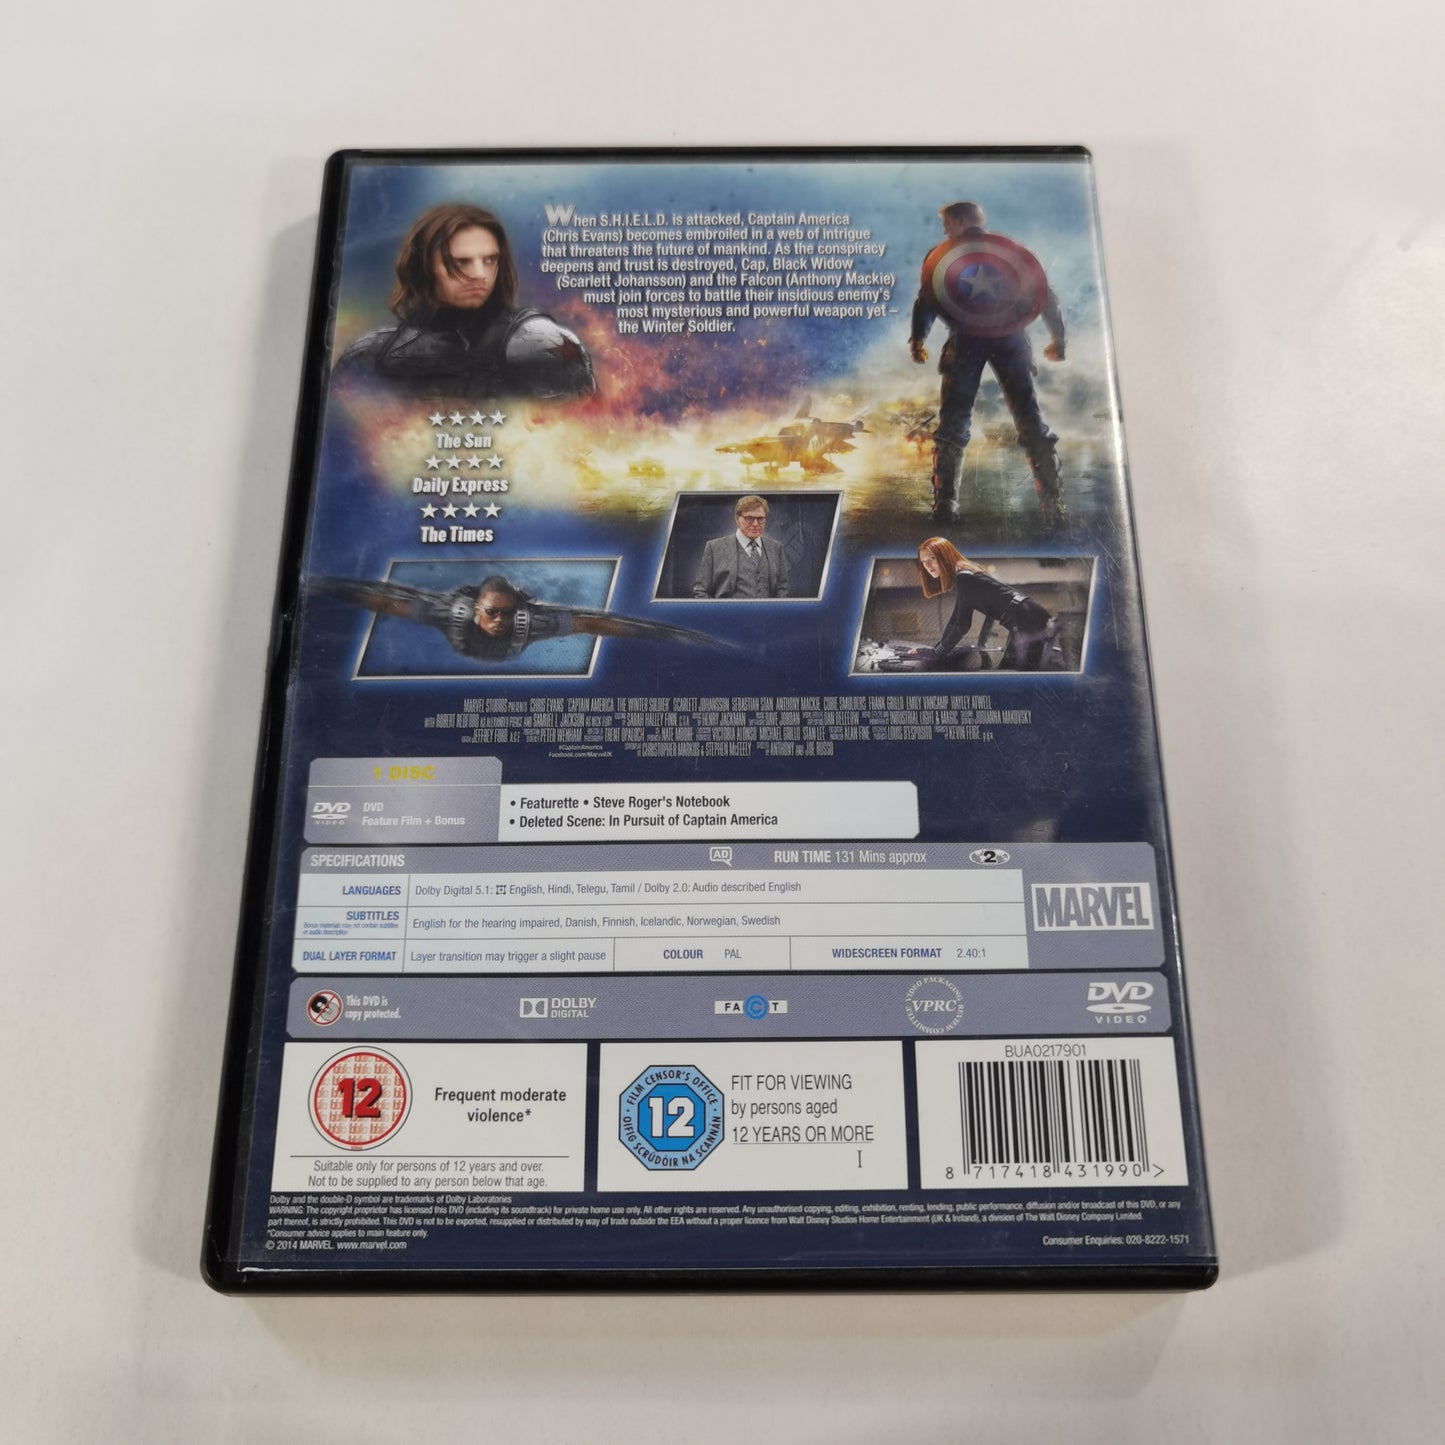 Captain America: The Winter Soldier (2014) - DVD UK